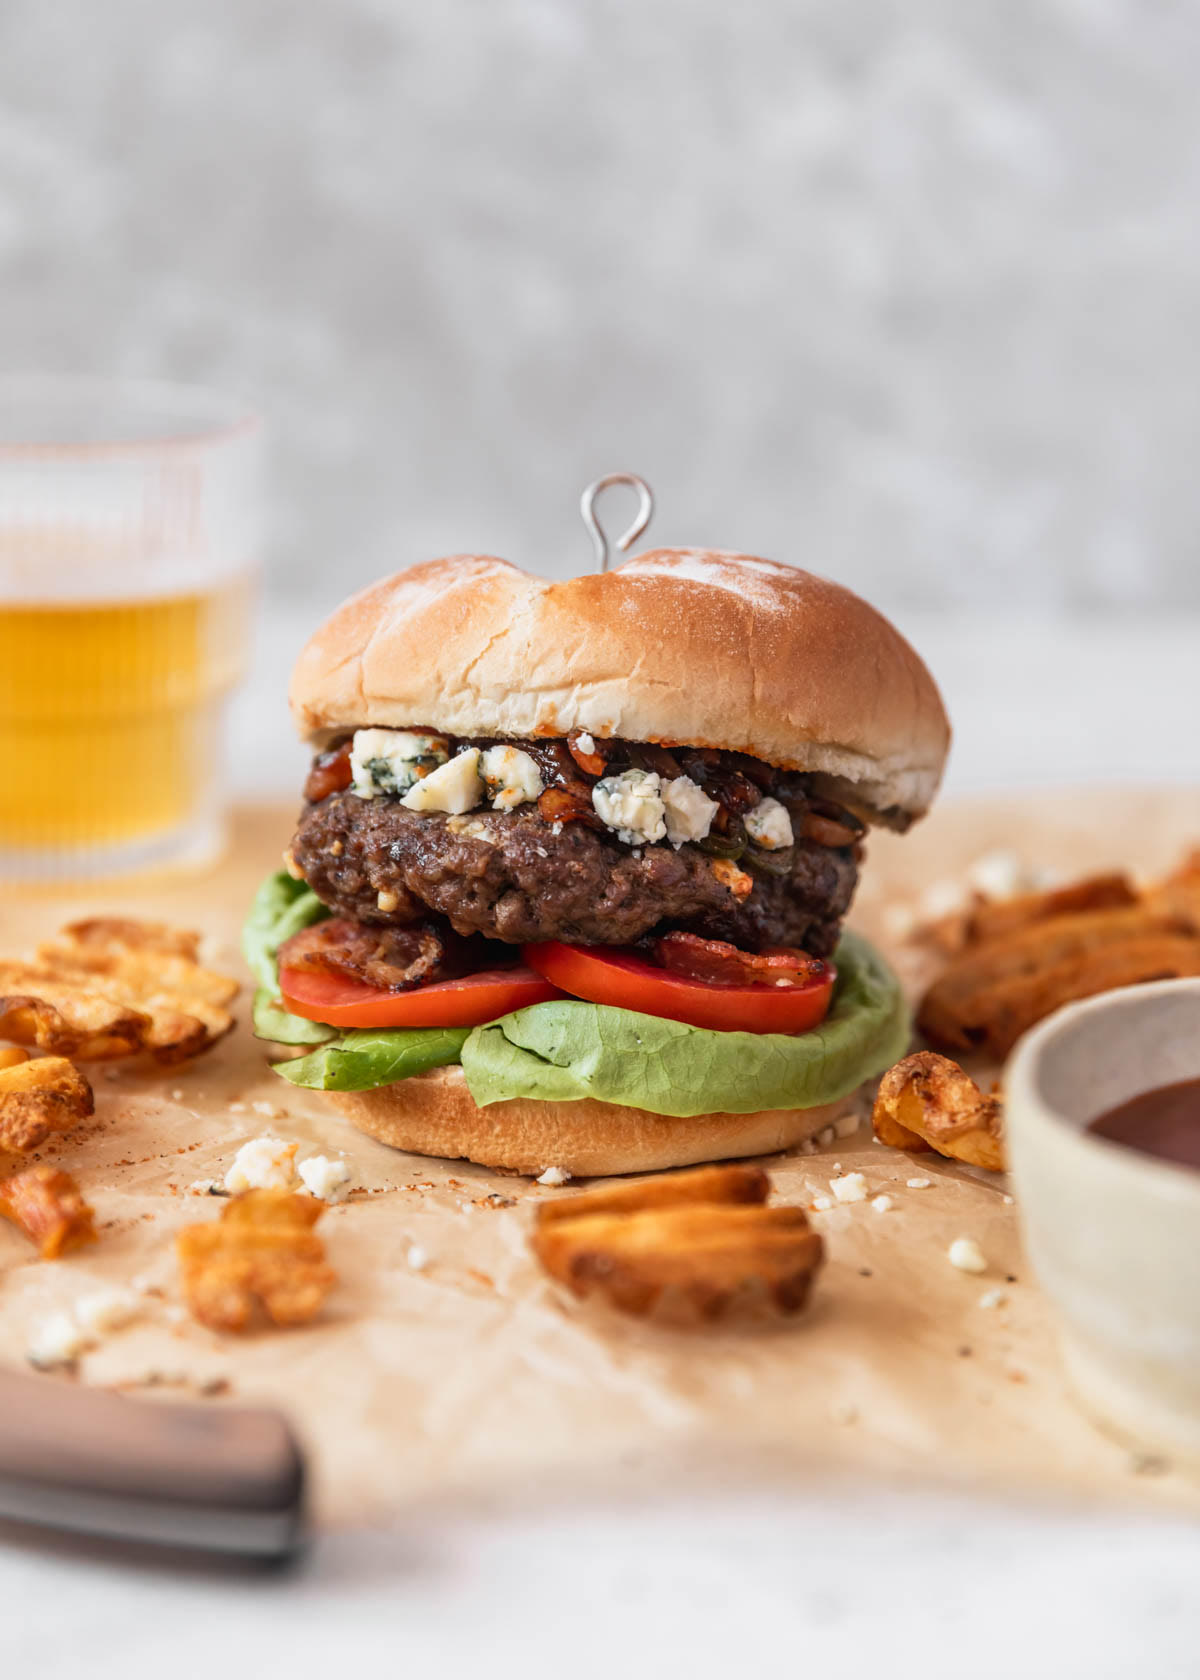 A BBQ bacon blue cheese burger with bacon, tomato, and lettuce on tan parchment paper next to waffle fries and a glass of beer in front of a grey background.